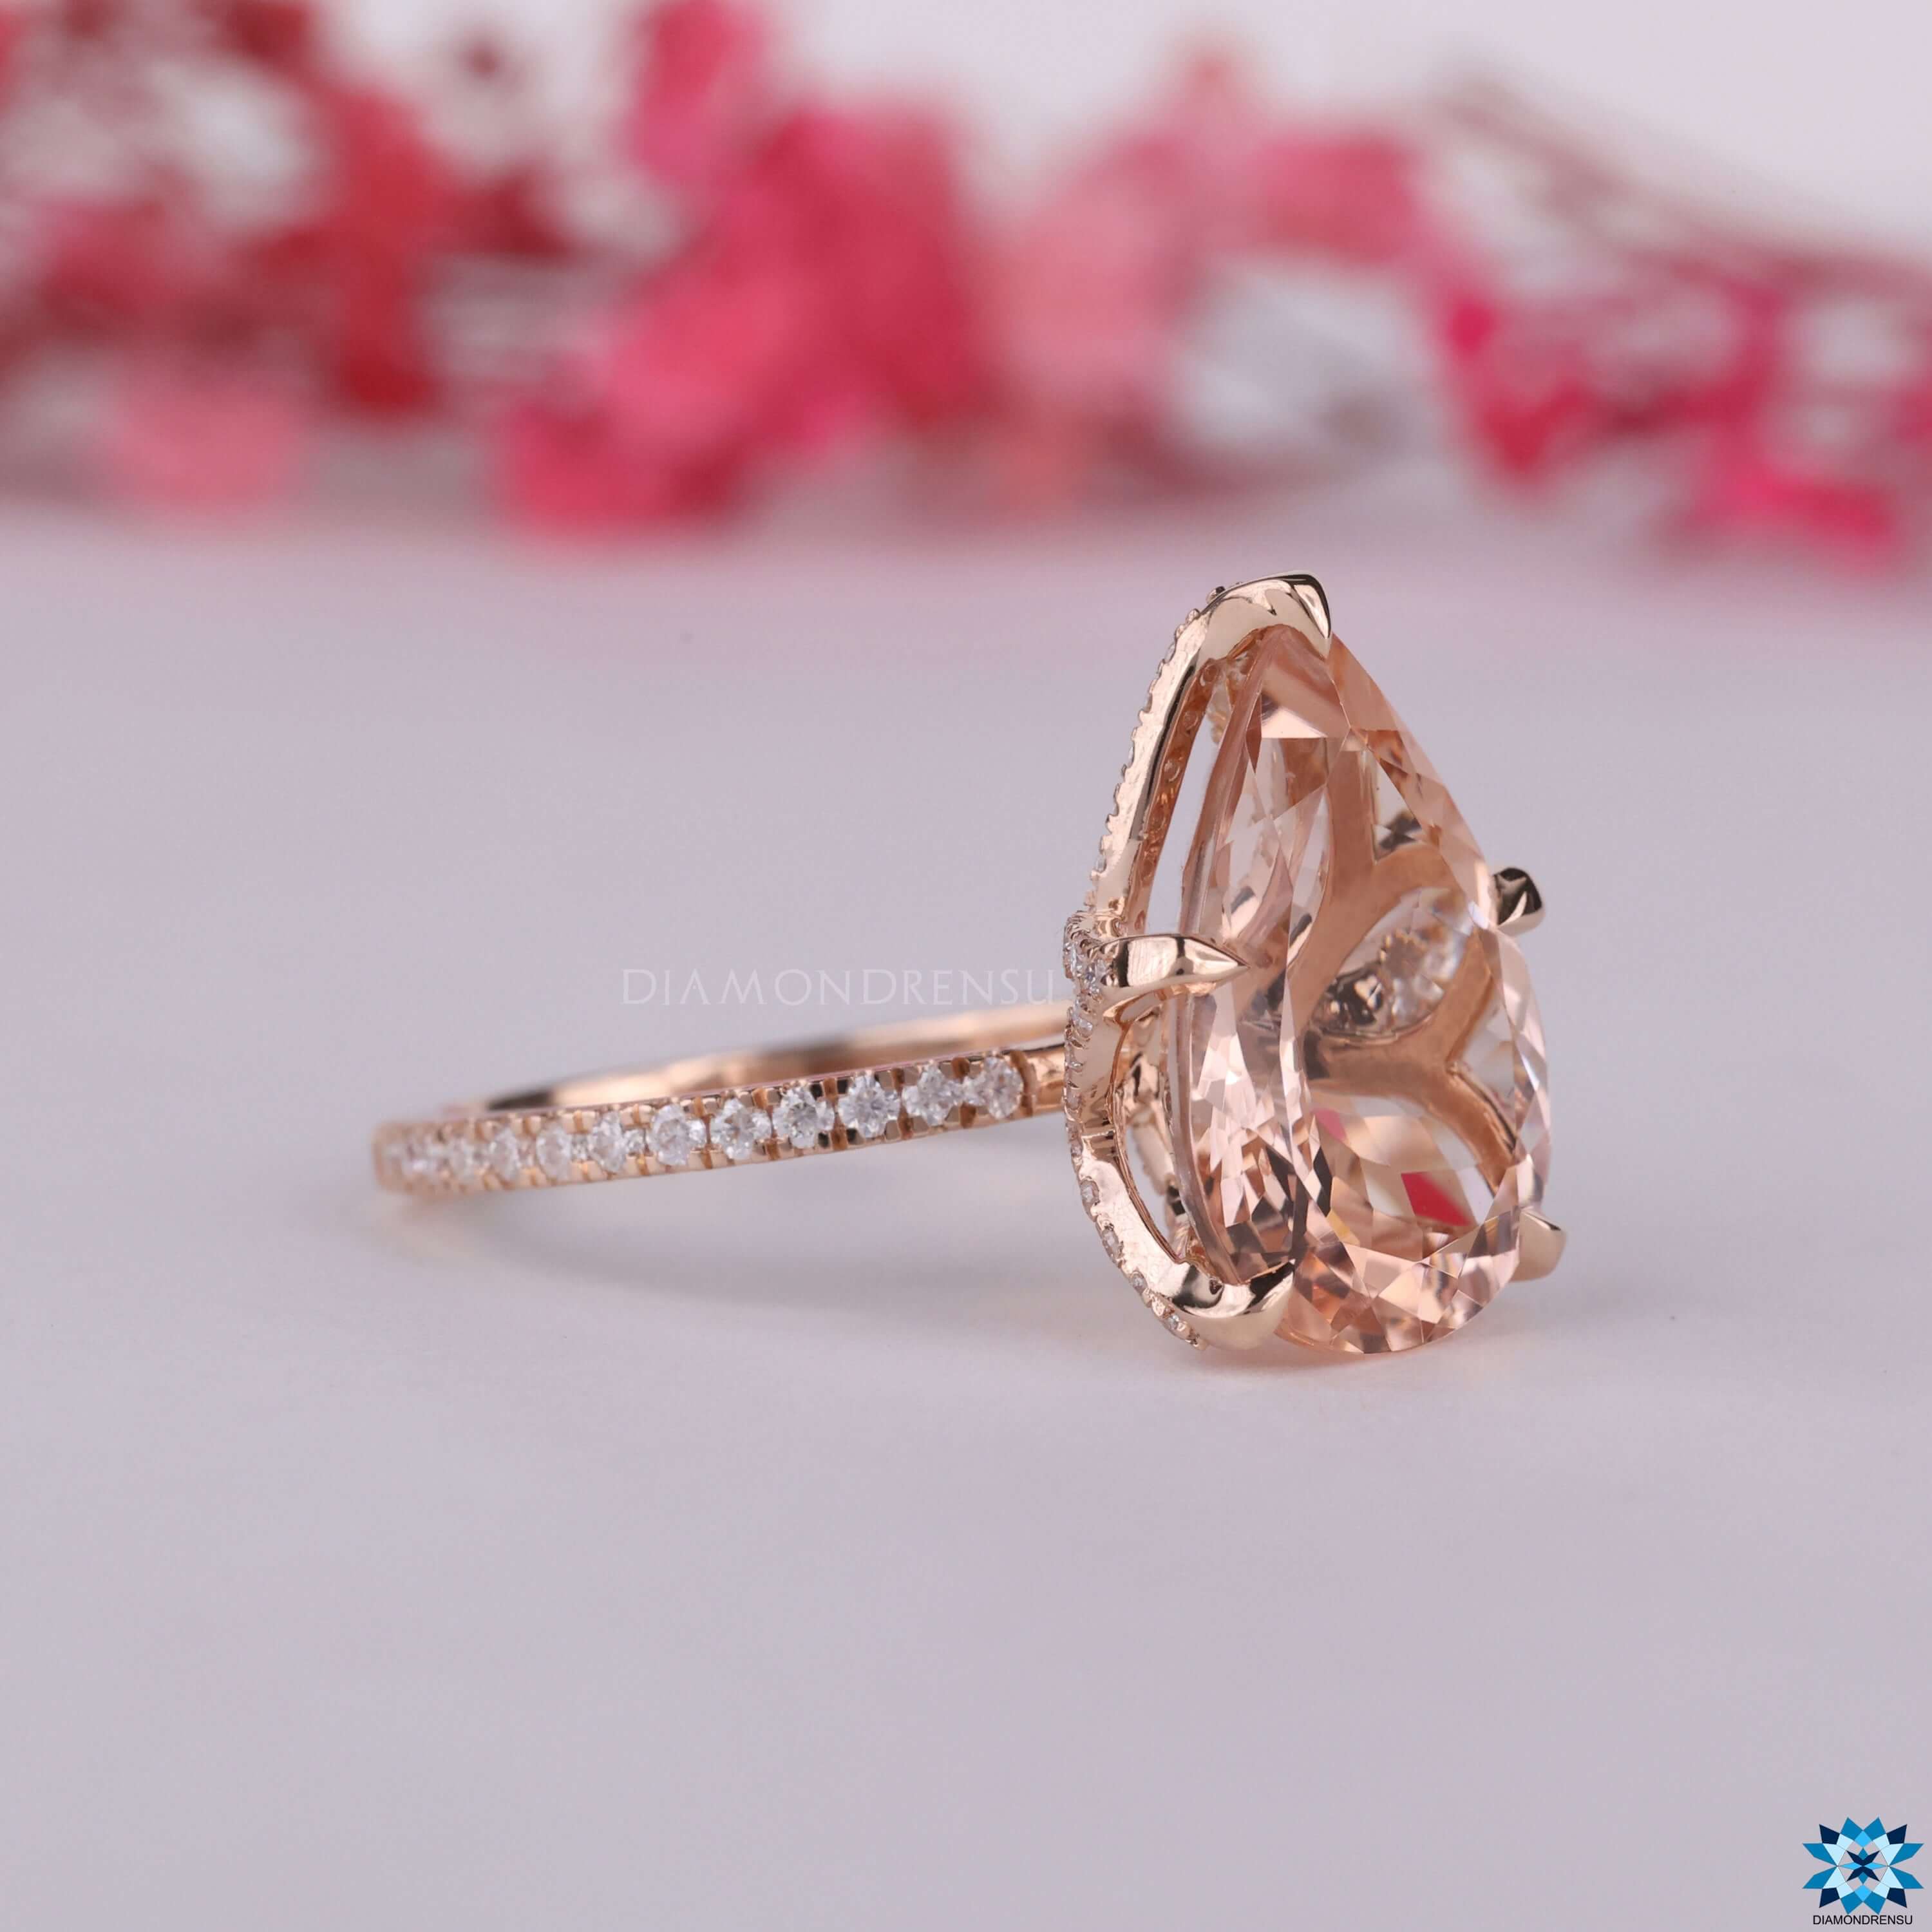 Morganite Engagement Ring With Triangle Accents | Jewelry by Johan -  Jewelry by Johan